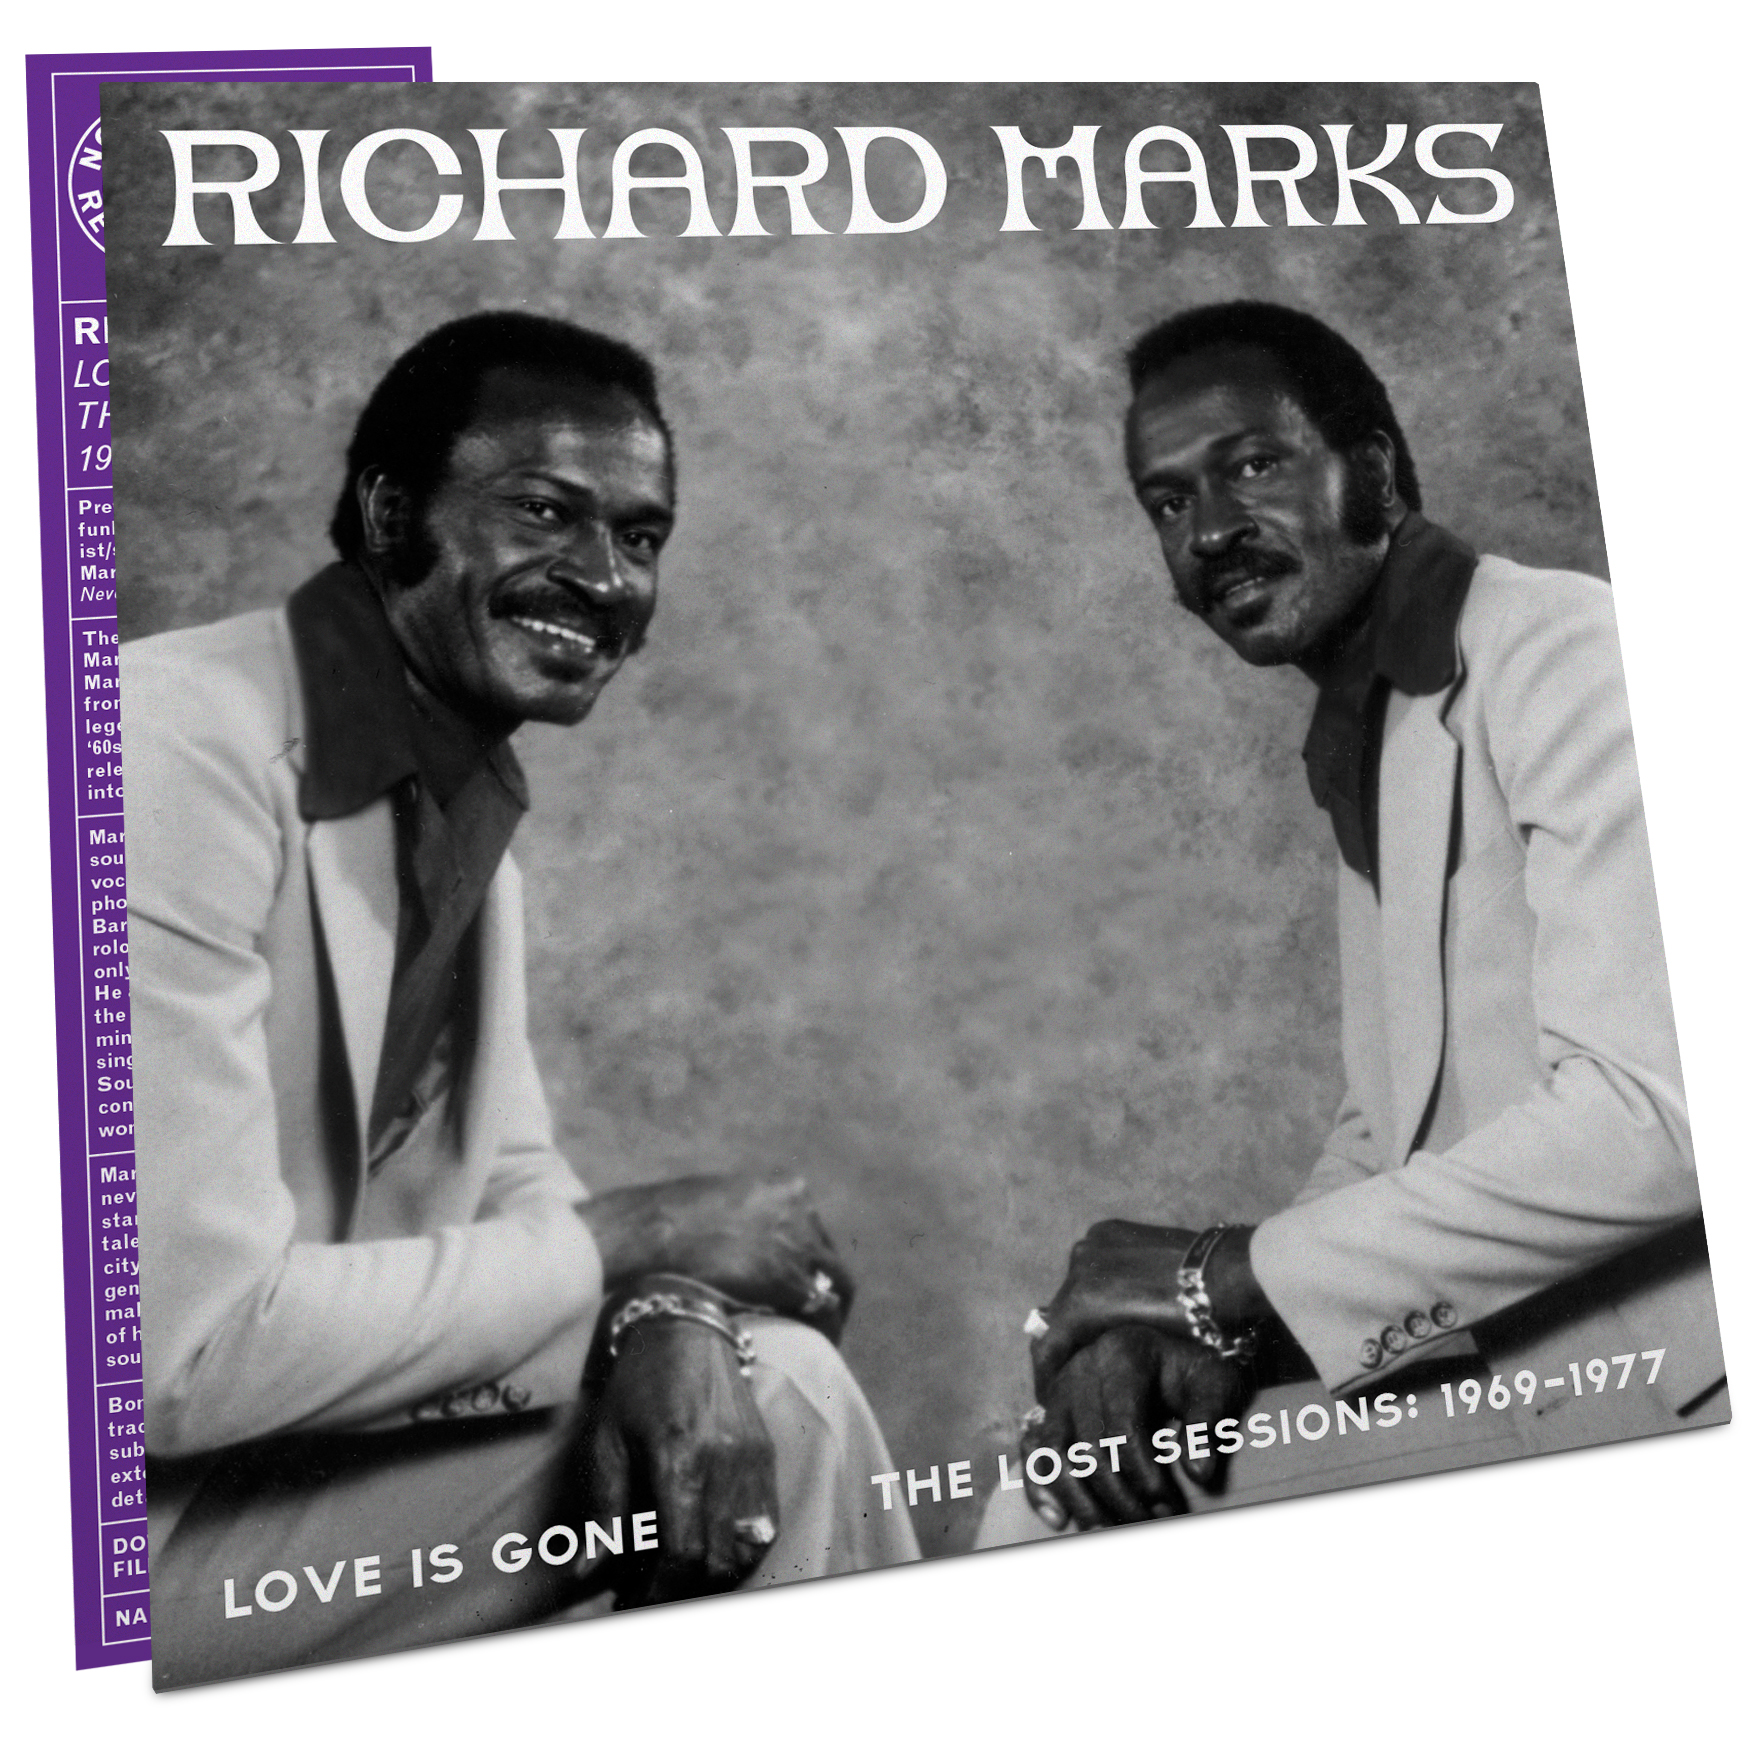 Richard Marks - Love Is Gone (The Lost Sessions: 1969-1977)